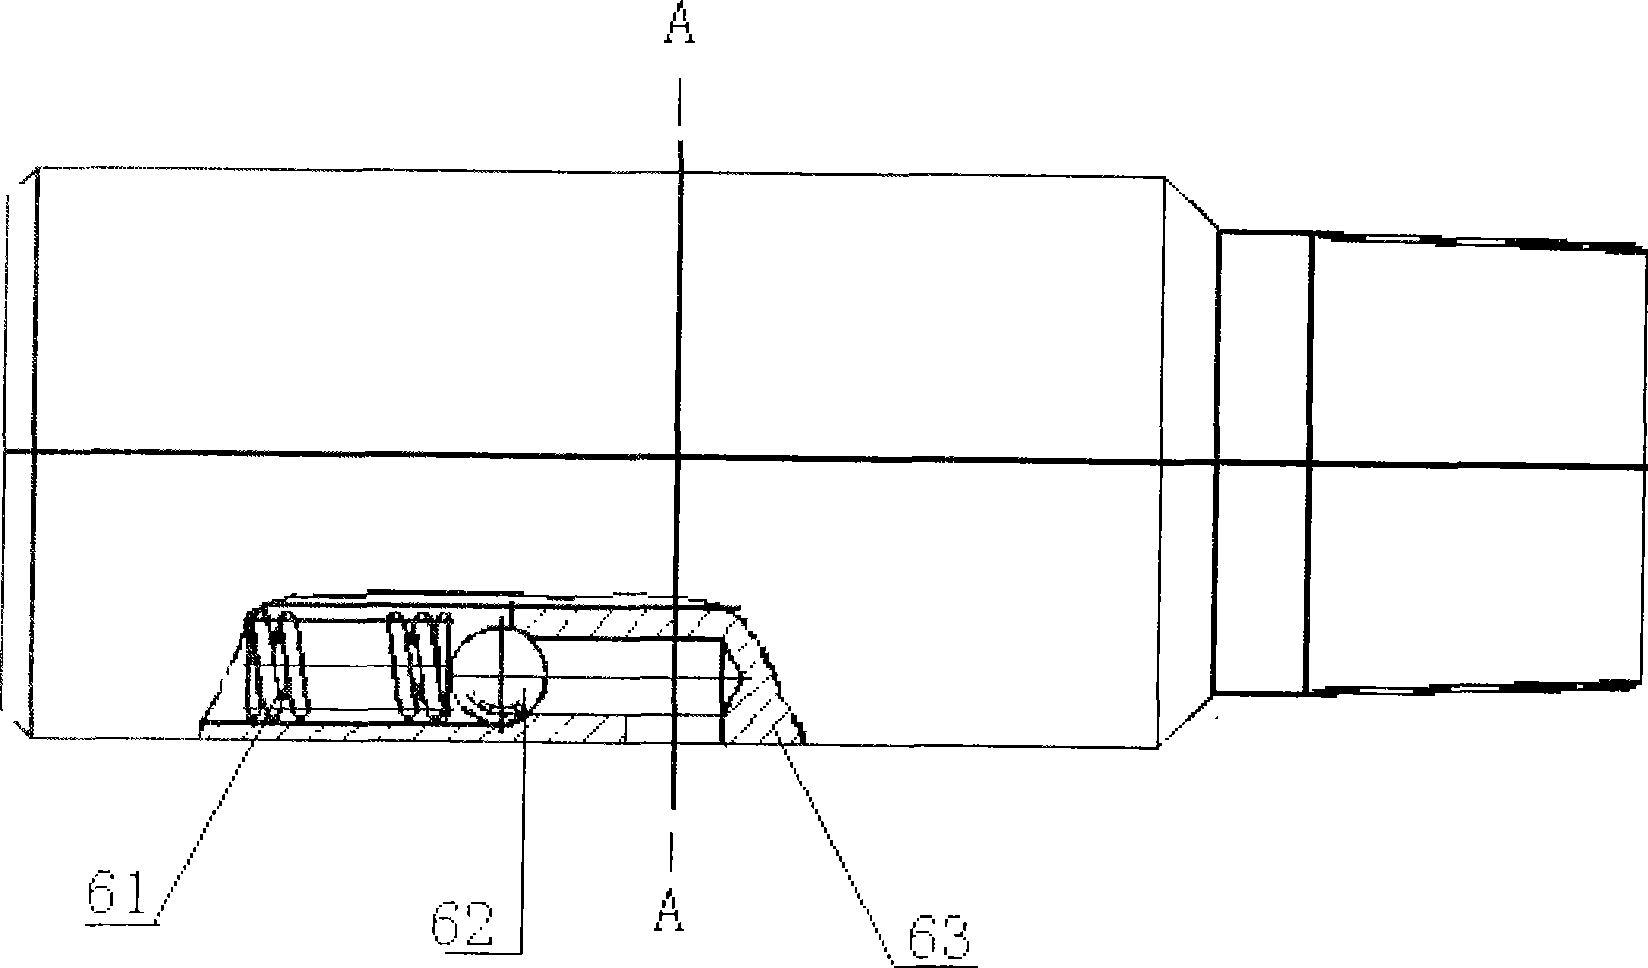 Same-well production technique column for low-permeation horizontal well